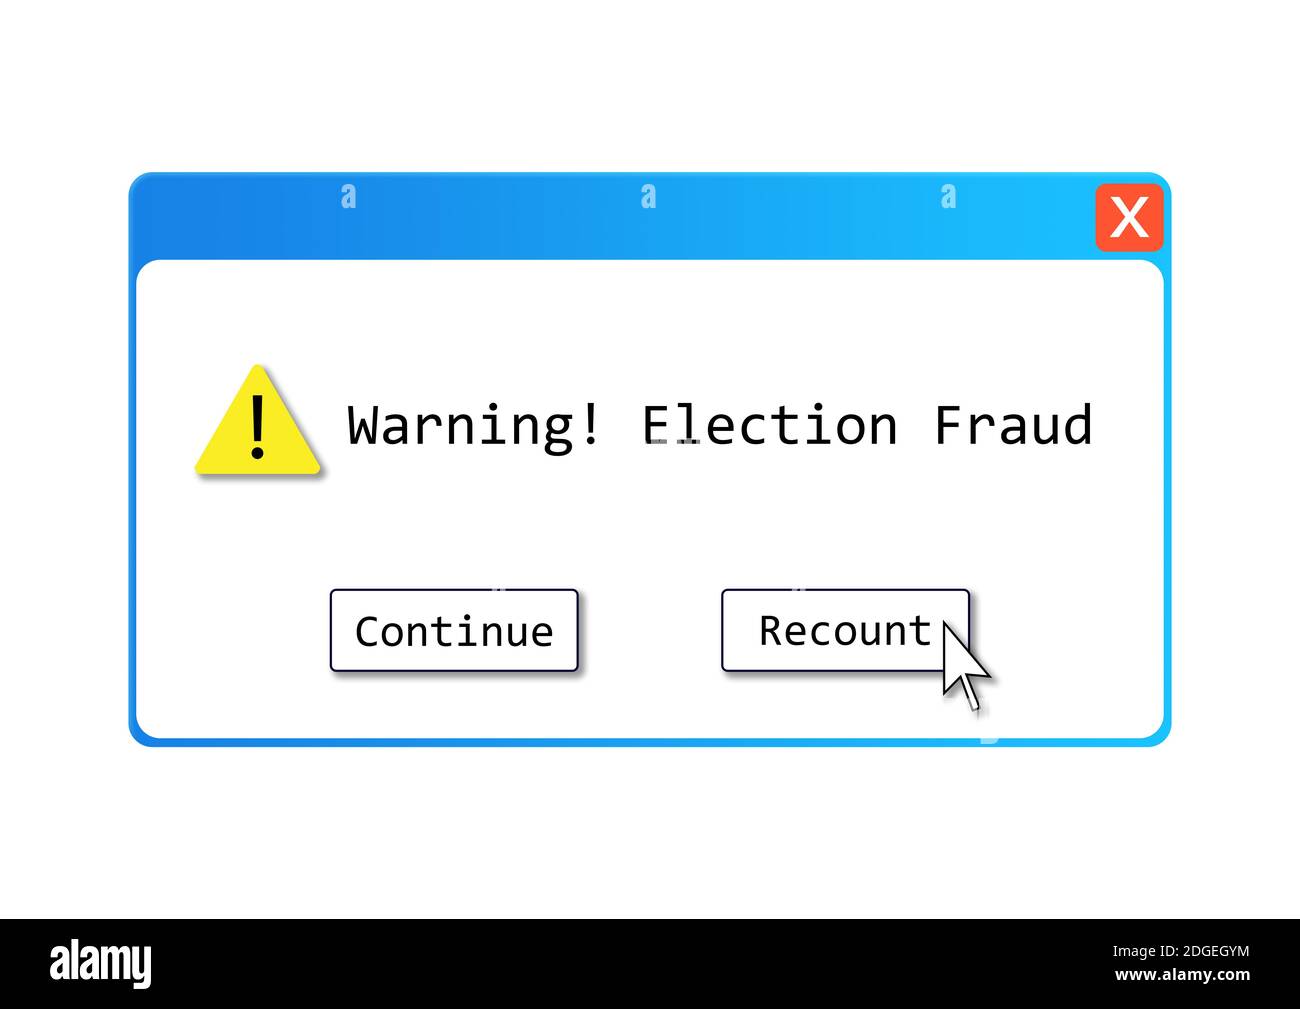 An ELECTION FRAUD text illustration about the alleged election controversy regarding computer systems, recounts and other potential forms of election Stock Photo